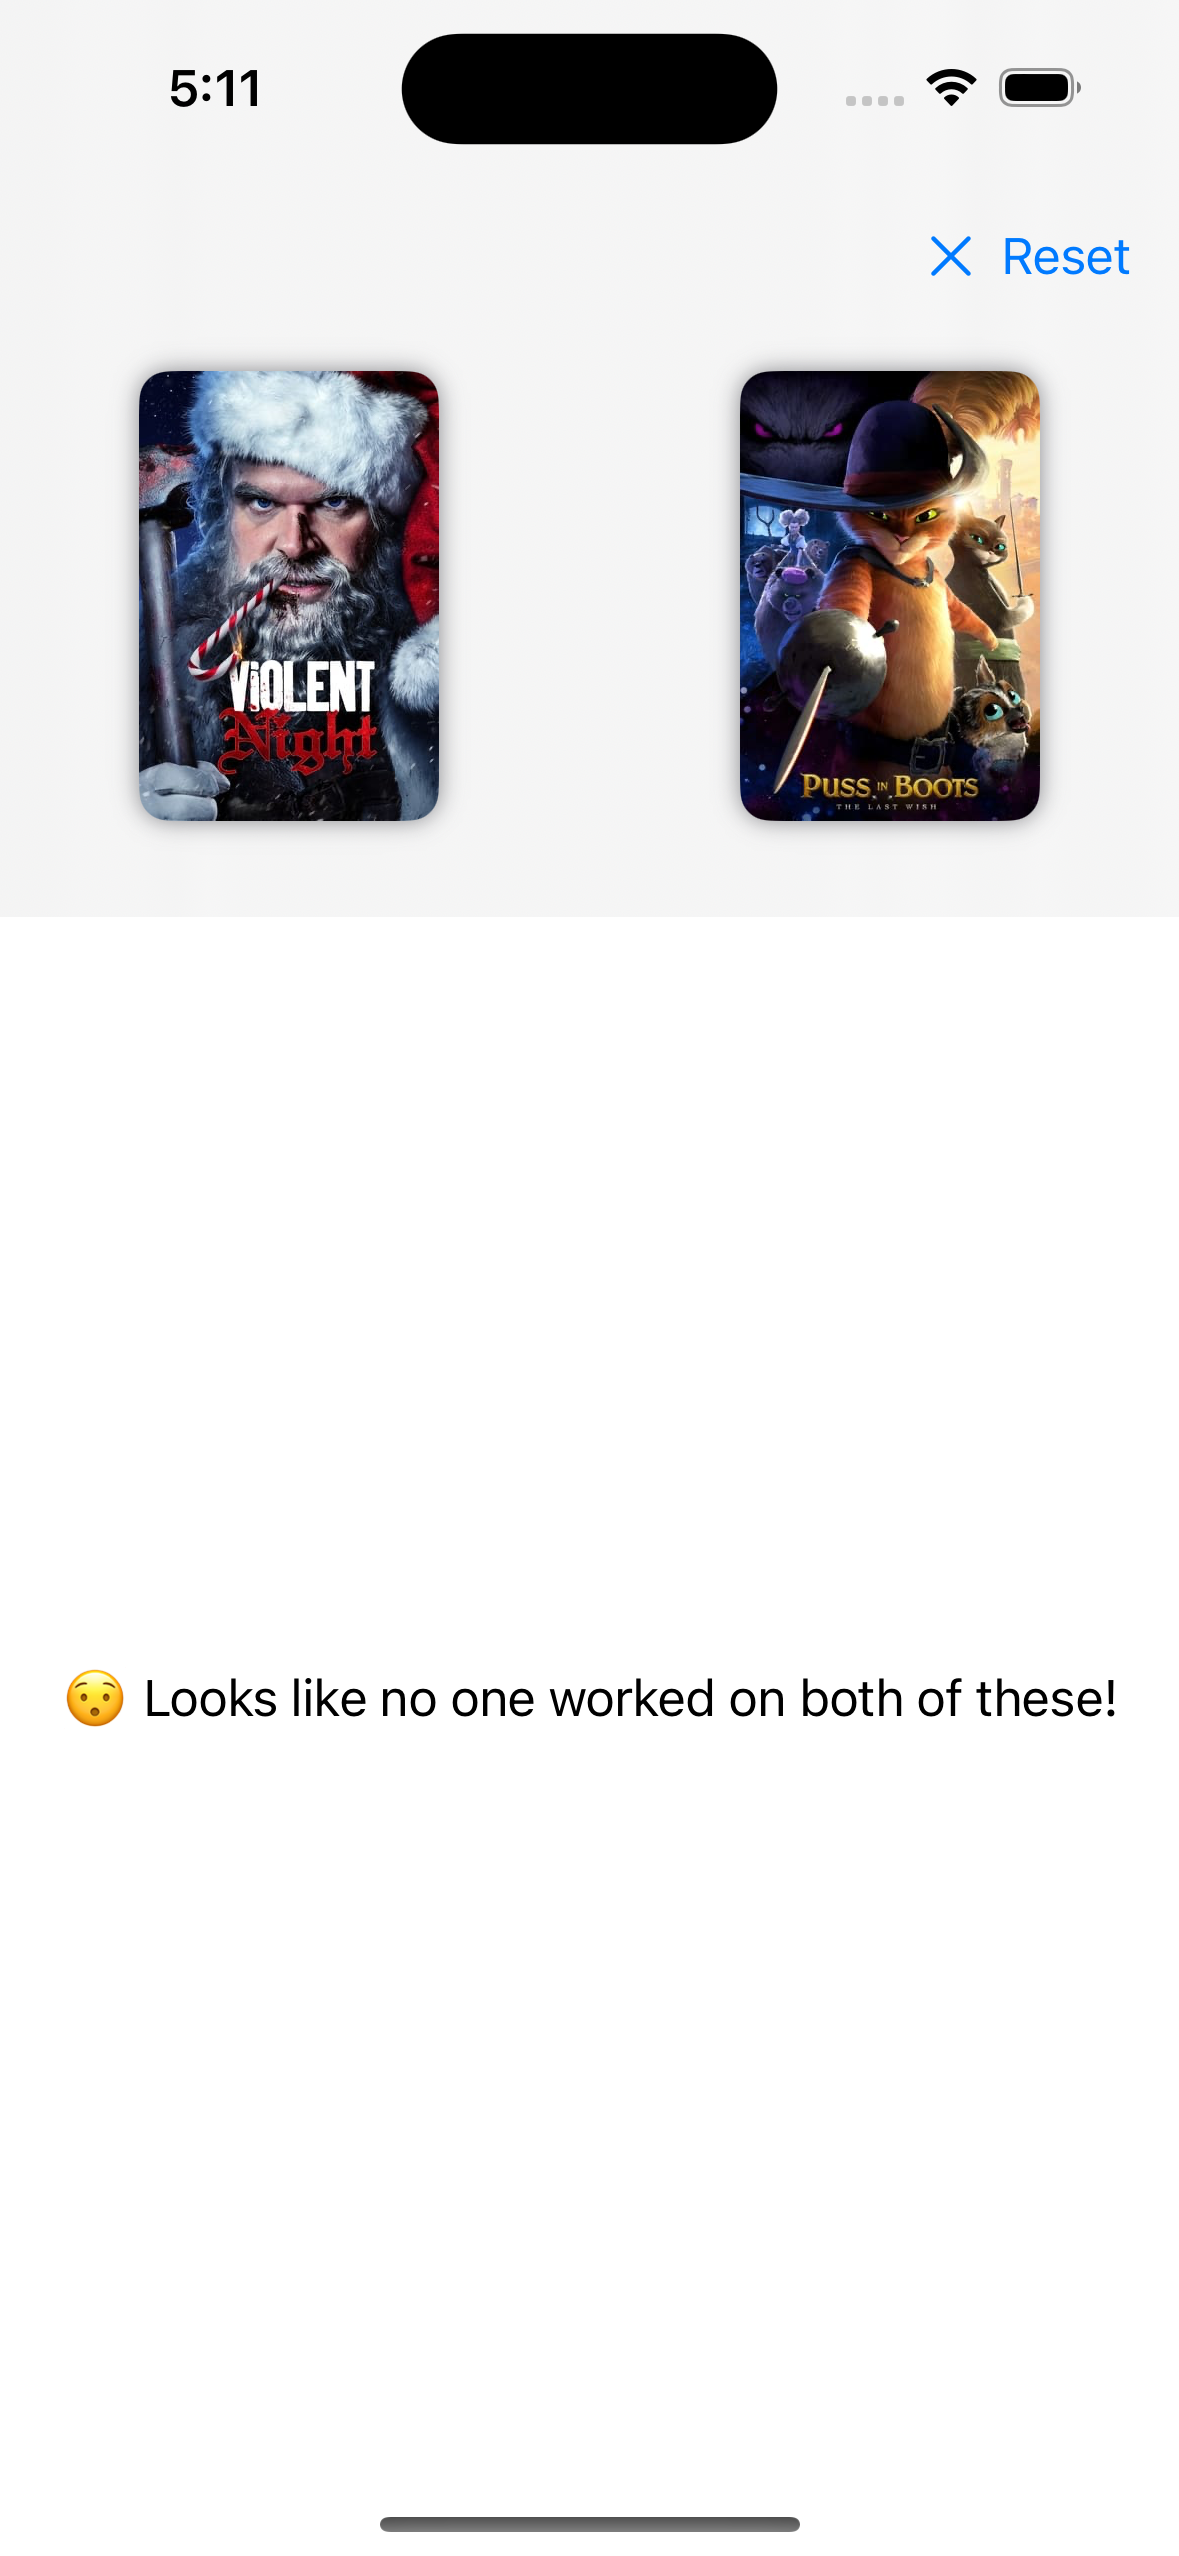 A screenshot of a comparison of the movies “Violent Night” and “Puss in Boots” showing that no one worked on both of these movies.